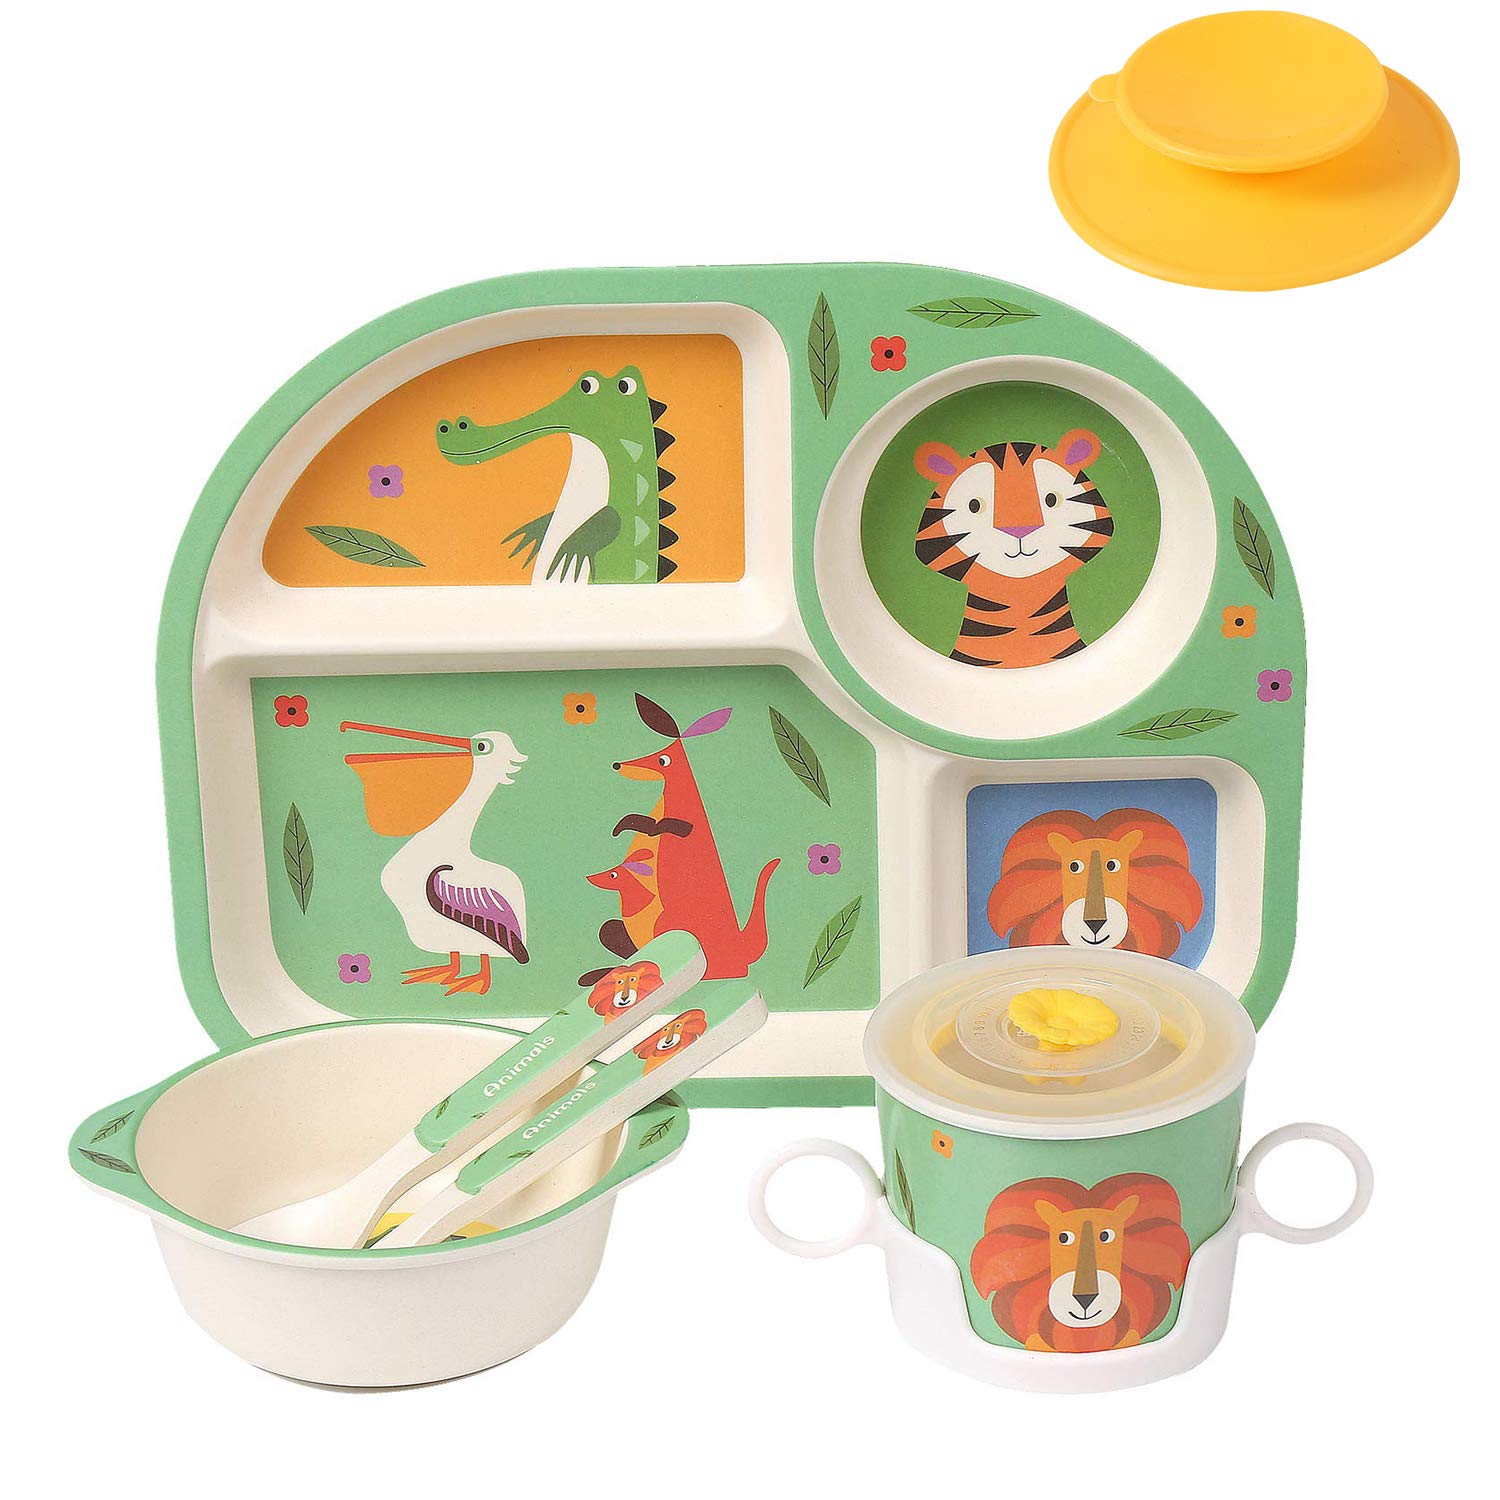 shopwithgreen Bamboo Divided Plates & Utensils For Toddlers, 7-Piece